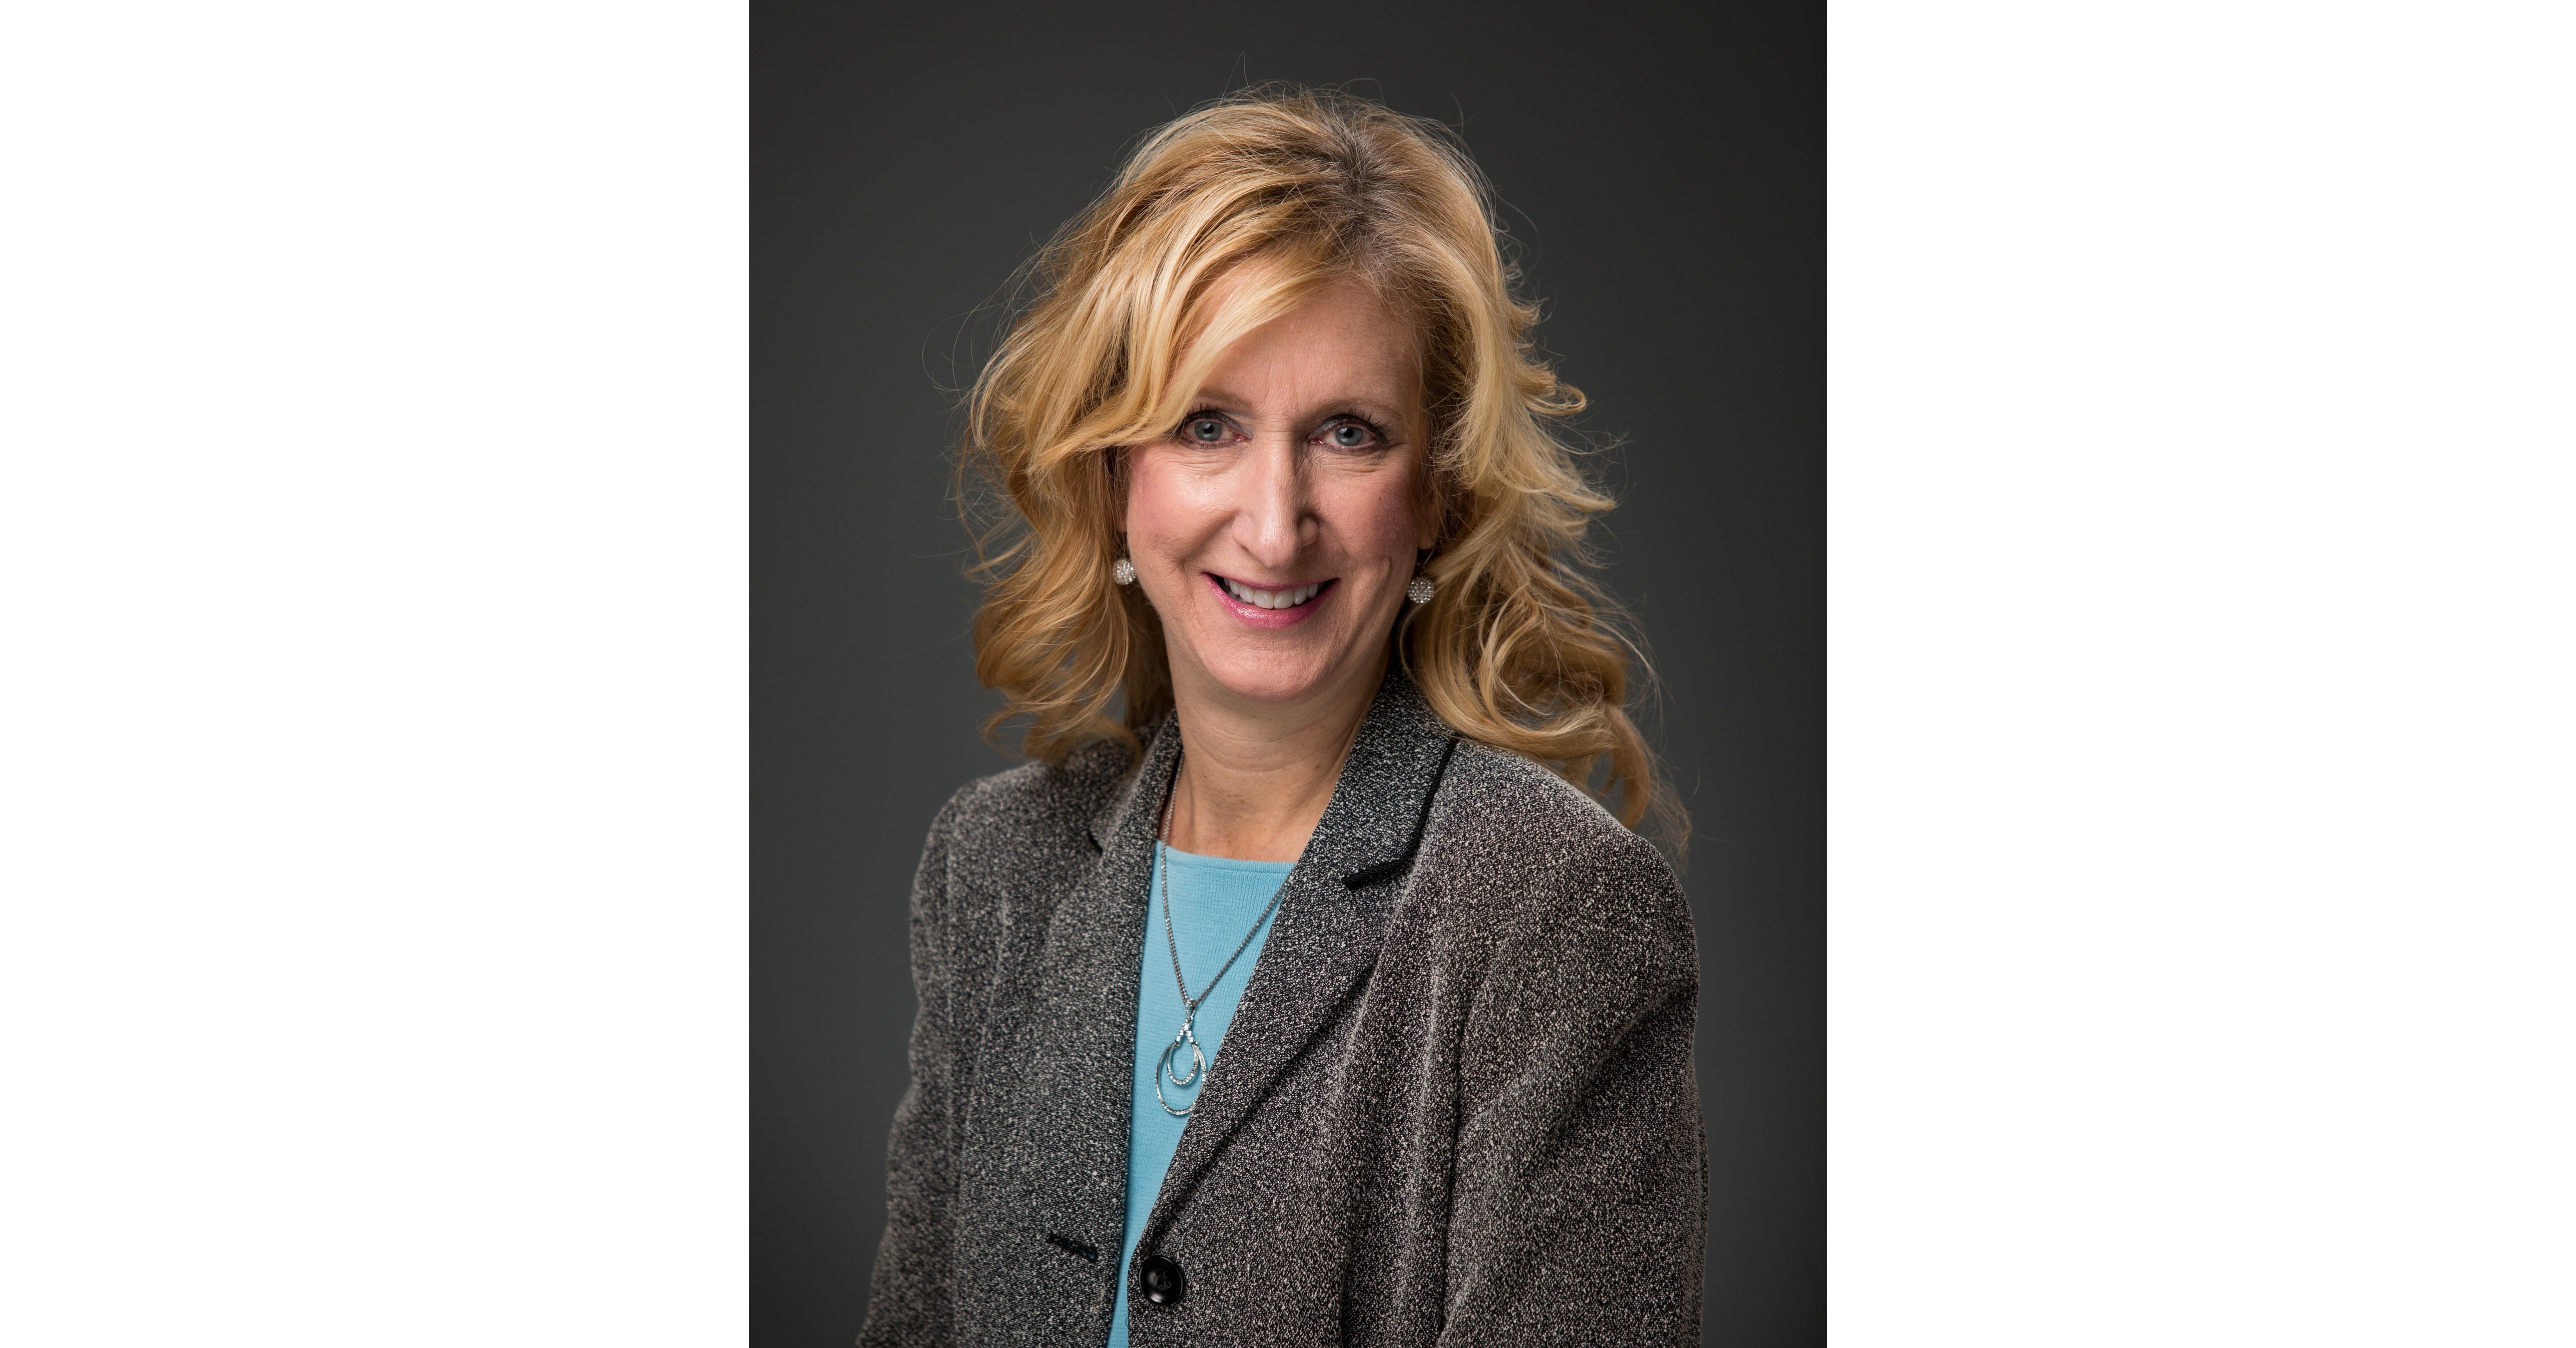 ANSYS Names Julie Murphy as Vice President of Human Resources